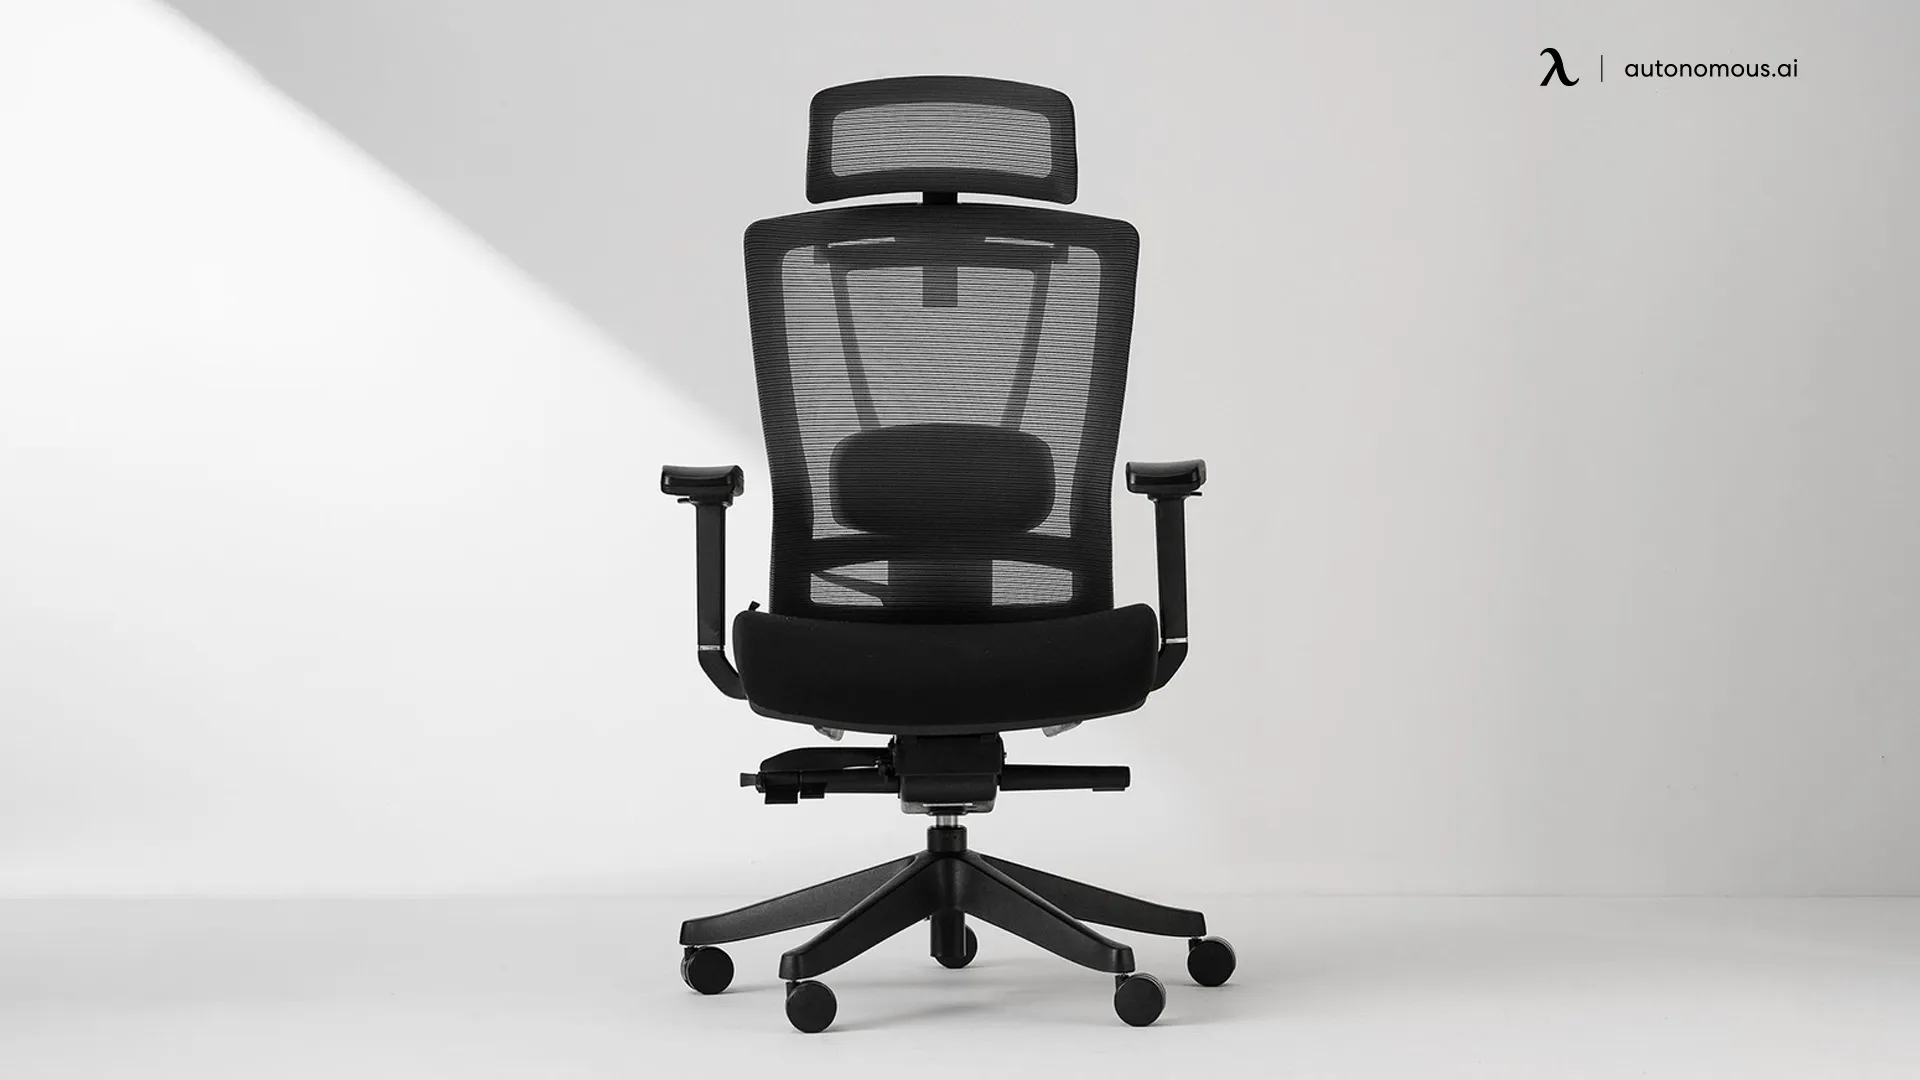 Choosing the Right Office Furniture: How Wide Should a Desk Chair Be?